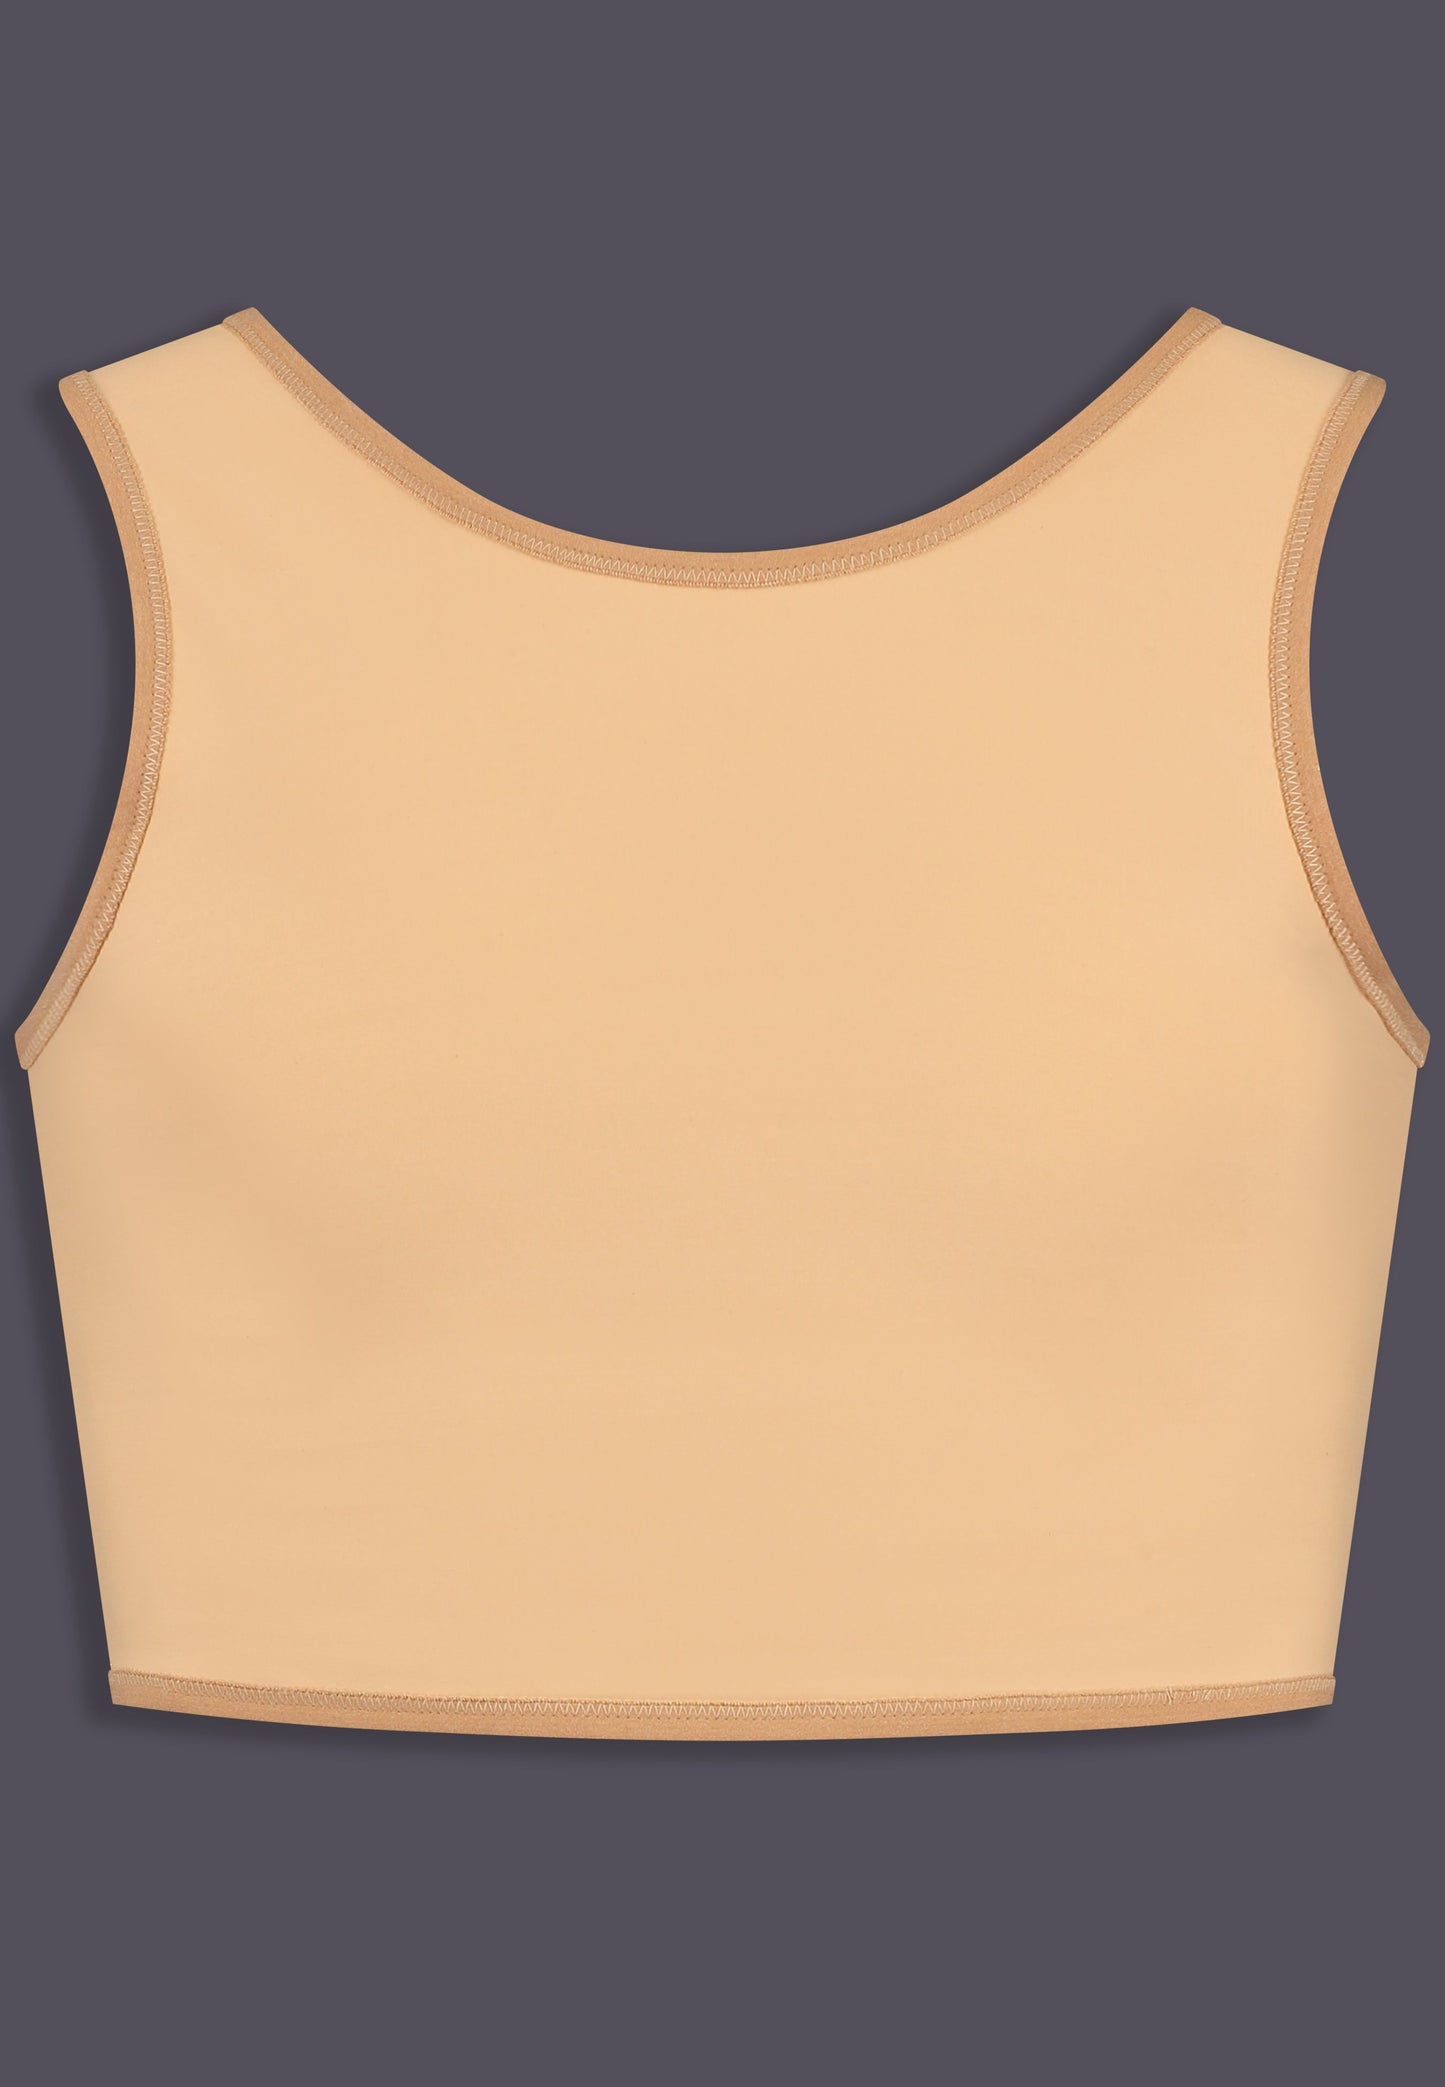 Gym Binder extra strong caramel front view